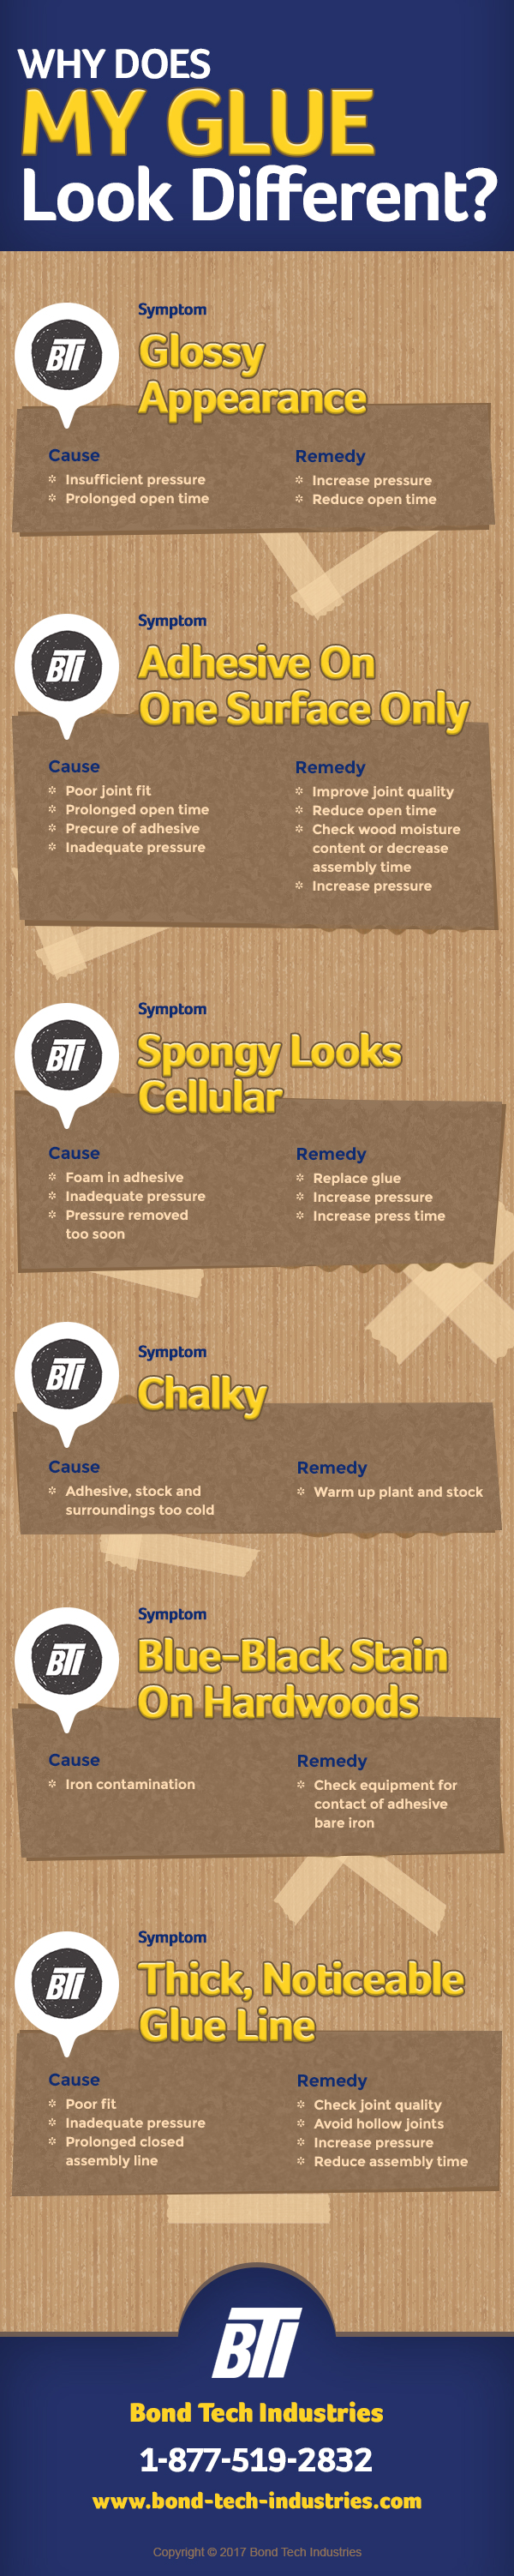 why does my glue look different infographic